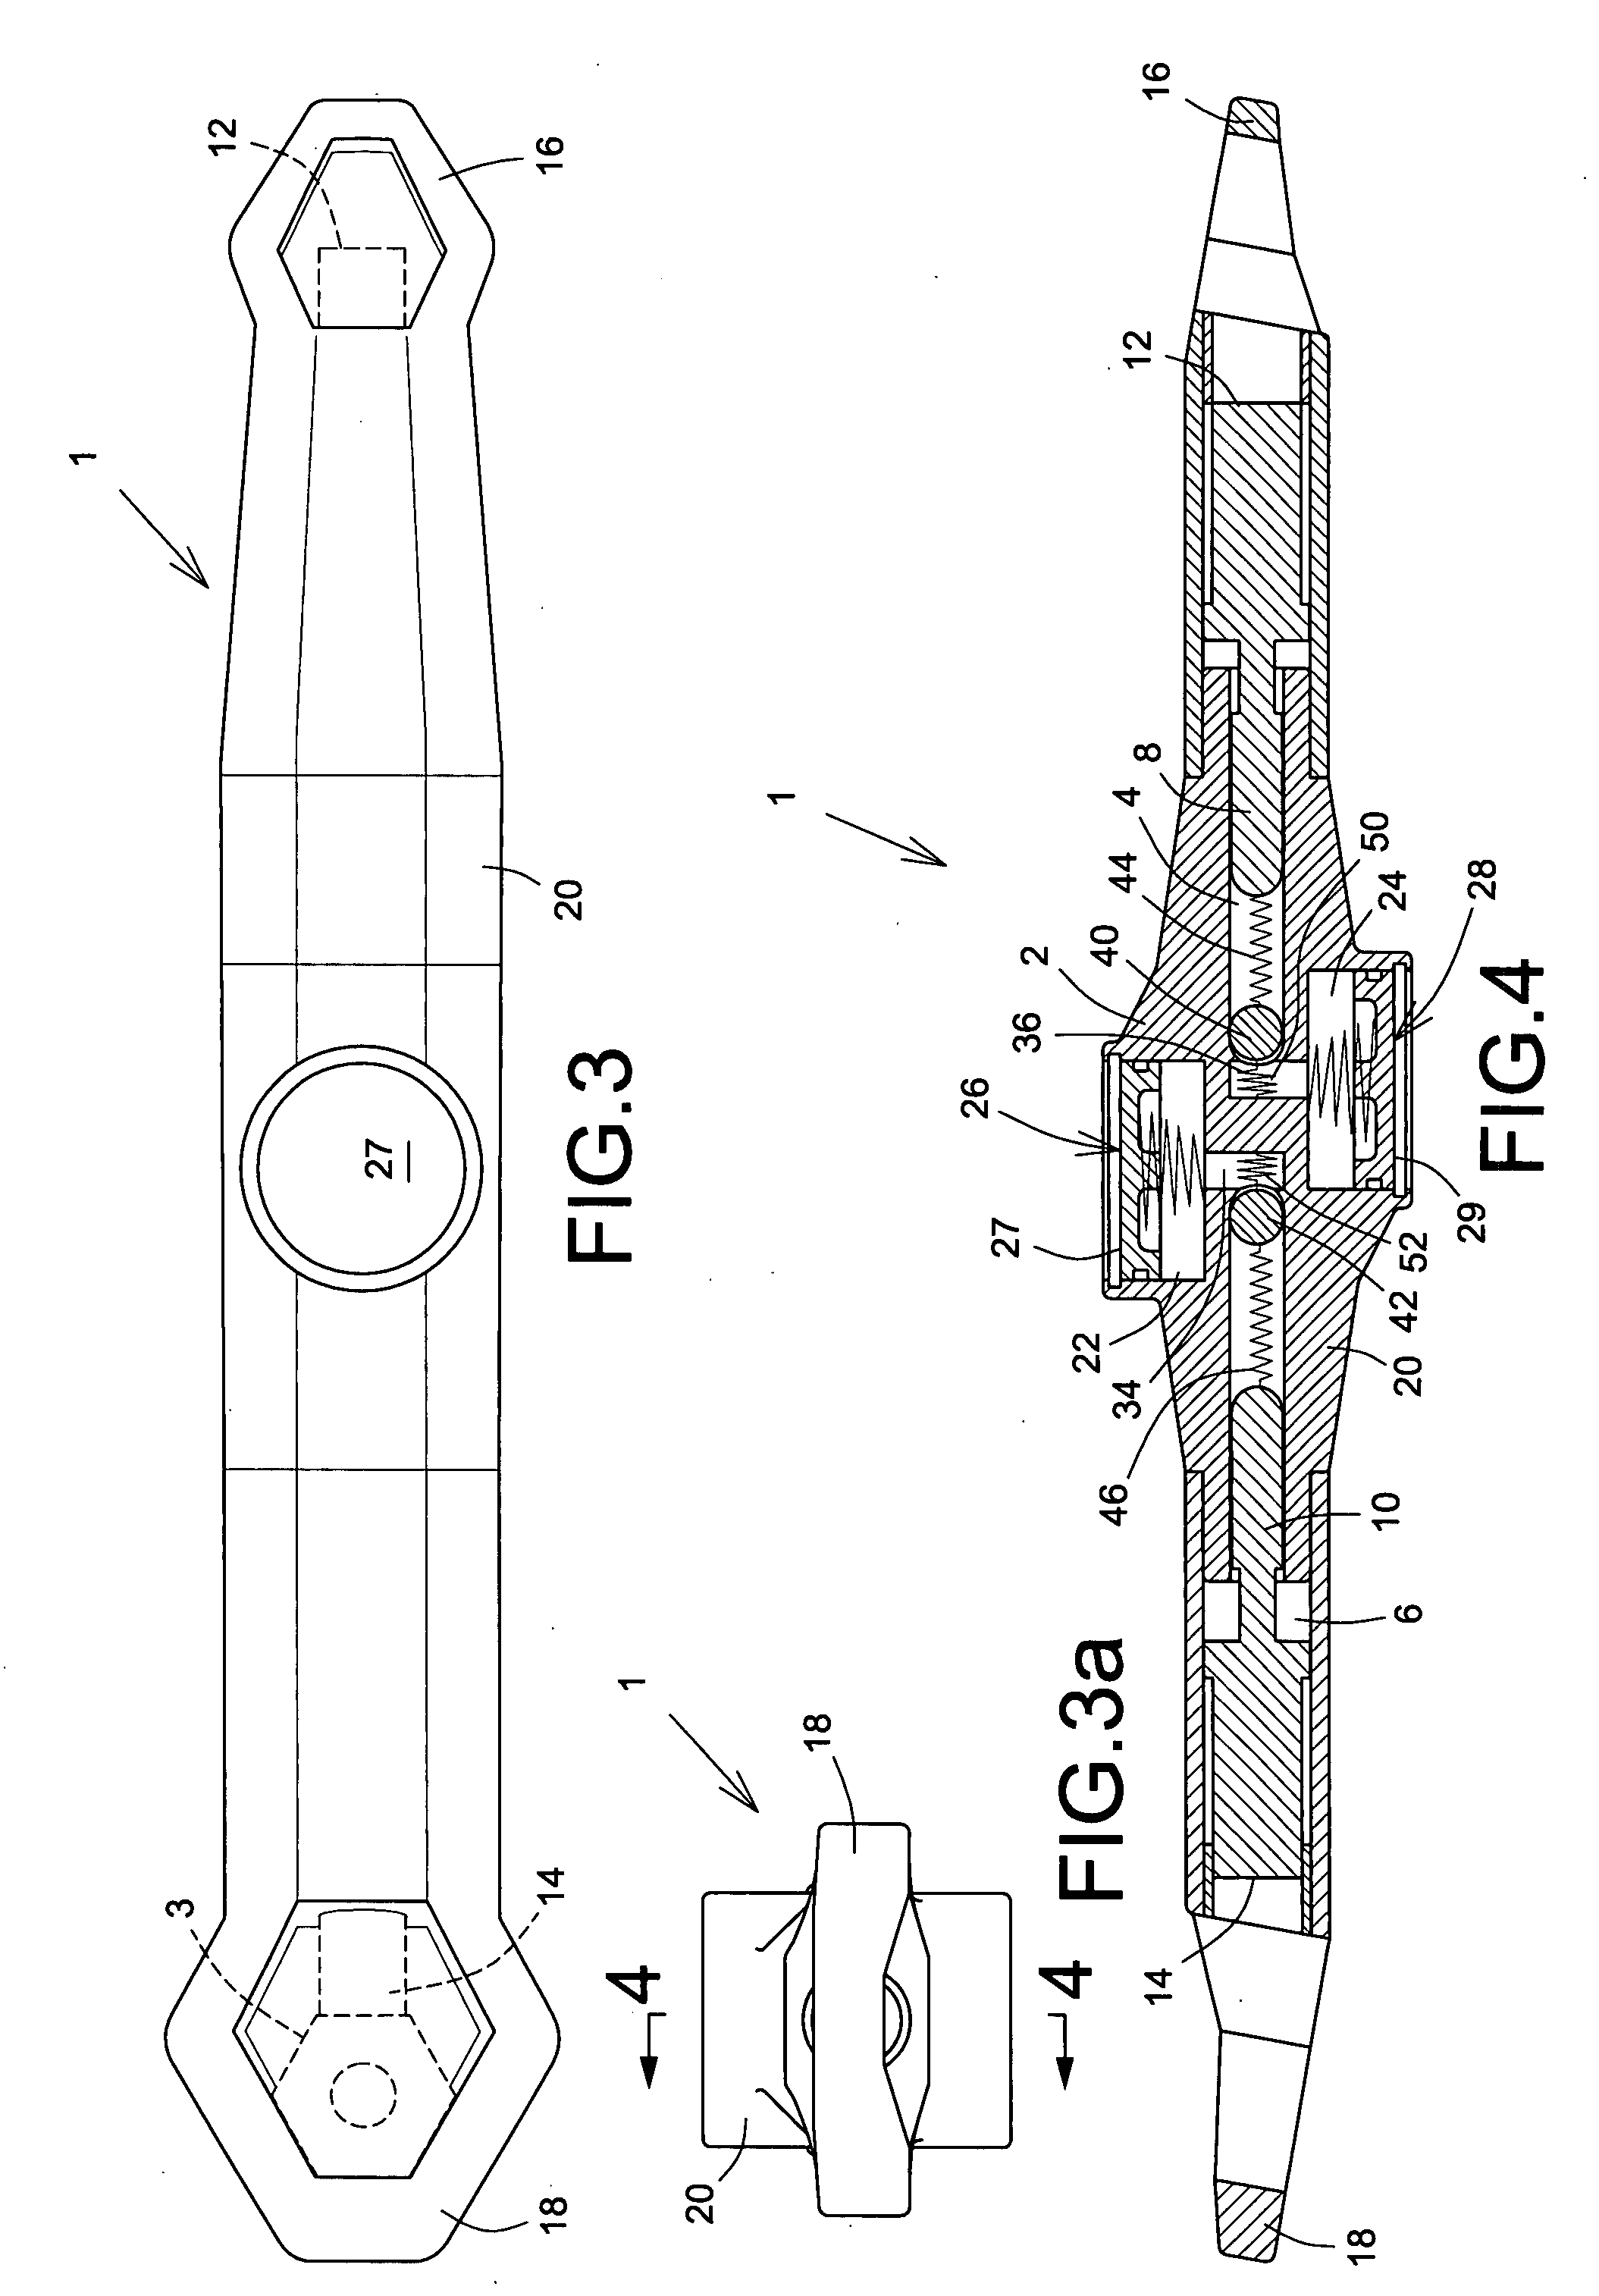 Adjusting device for a hand-held tool